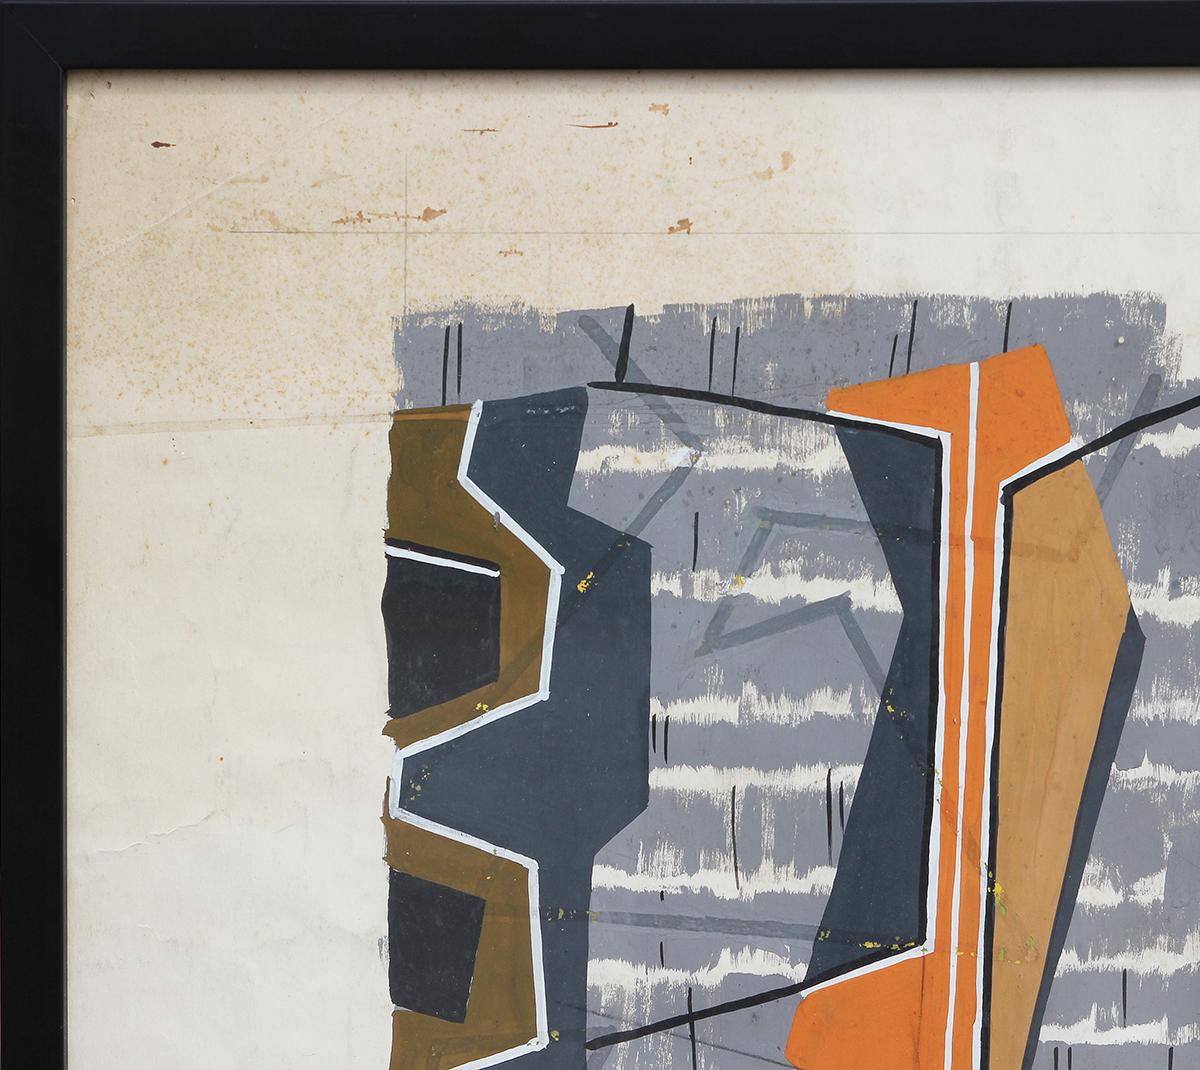 Modern orange, brown, gray, and black geometric abstract composition by textile designer John Little. The work was created as a proposed design for a wallpaper. Titled in pencil along front lower margin. Currently hung in a solid black frame with a